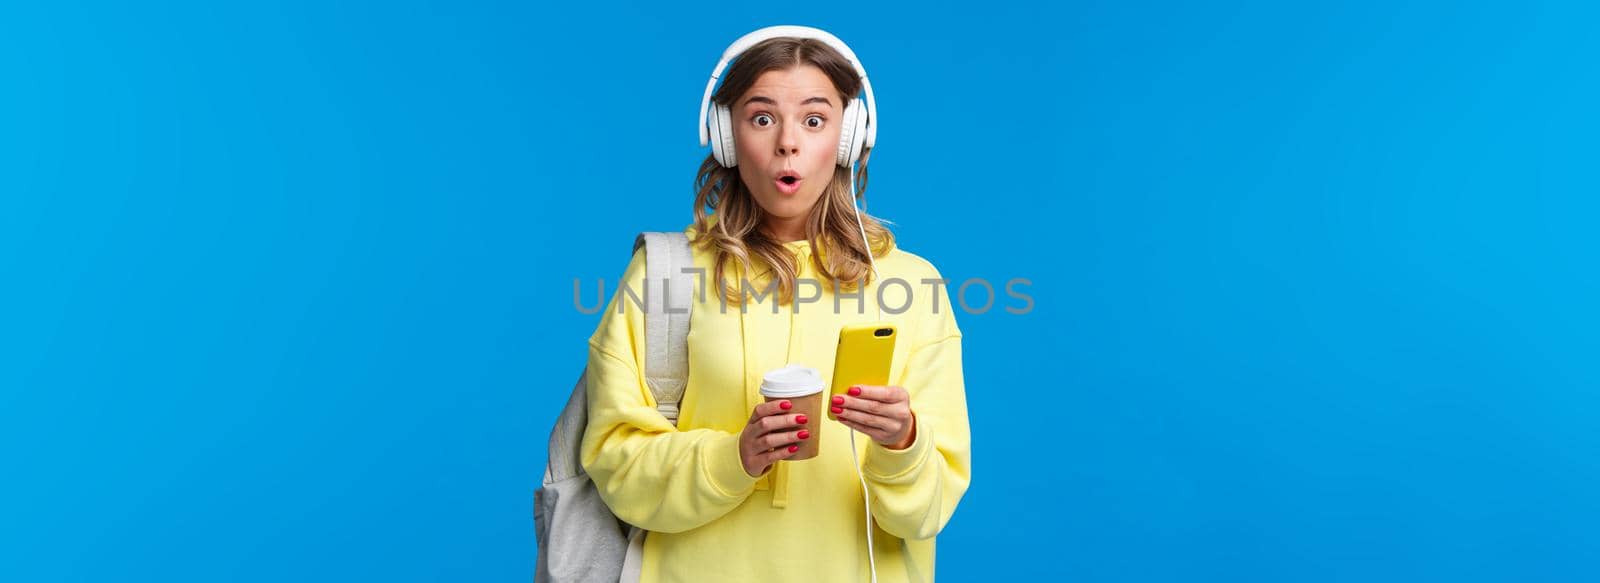 Surprised and amused young blond pretty girl look amazed camera say wow, wearing headphones and texting friend via smartphone, hold mobile phone, backpack and take-away coffee.